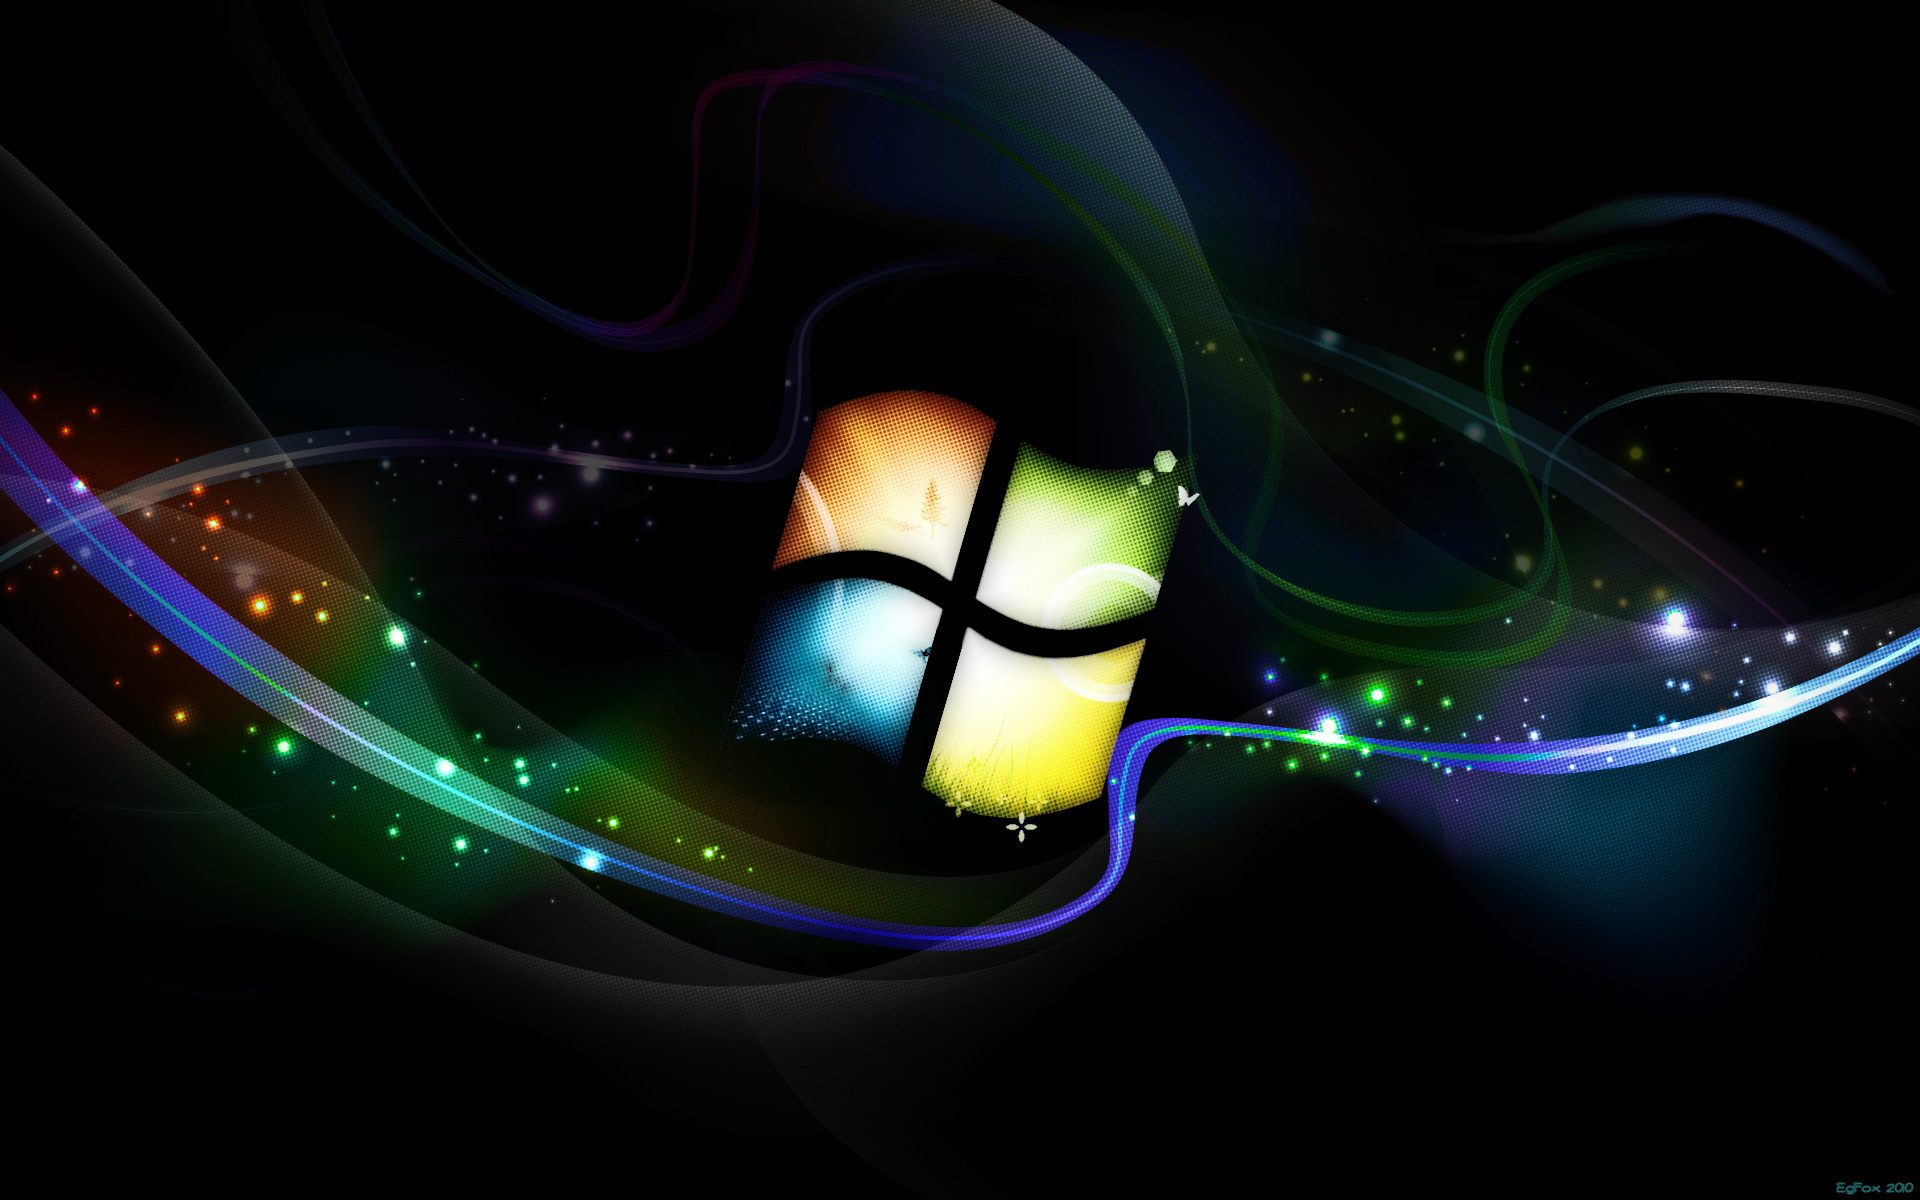 High Quality Windows Xp Wallpaper For Your Desktop Hope You Like It